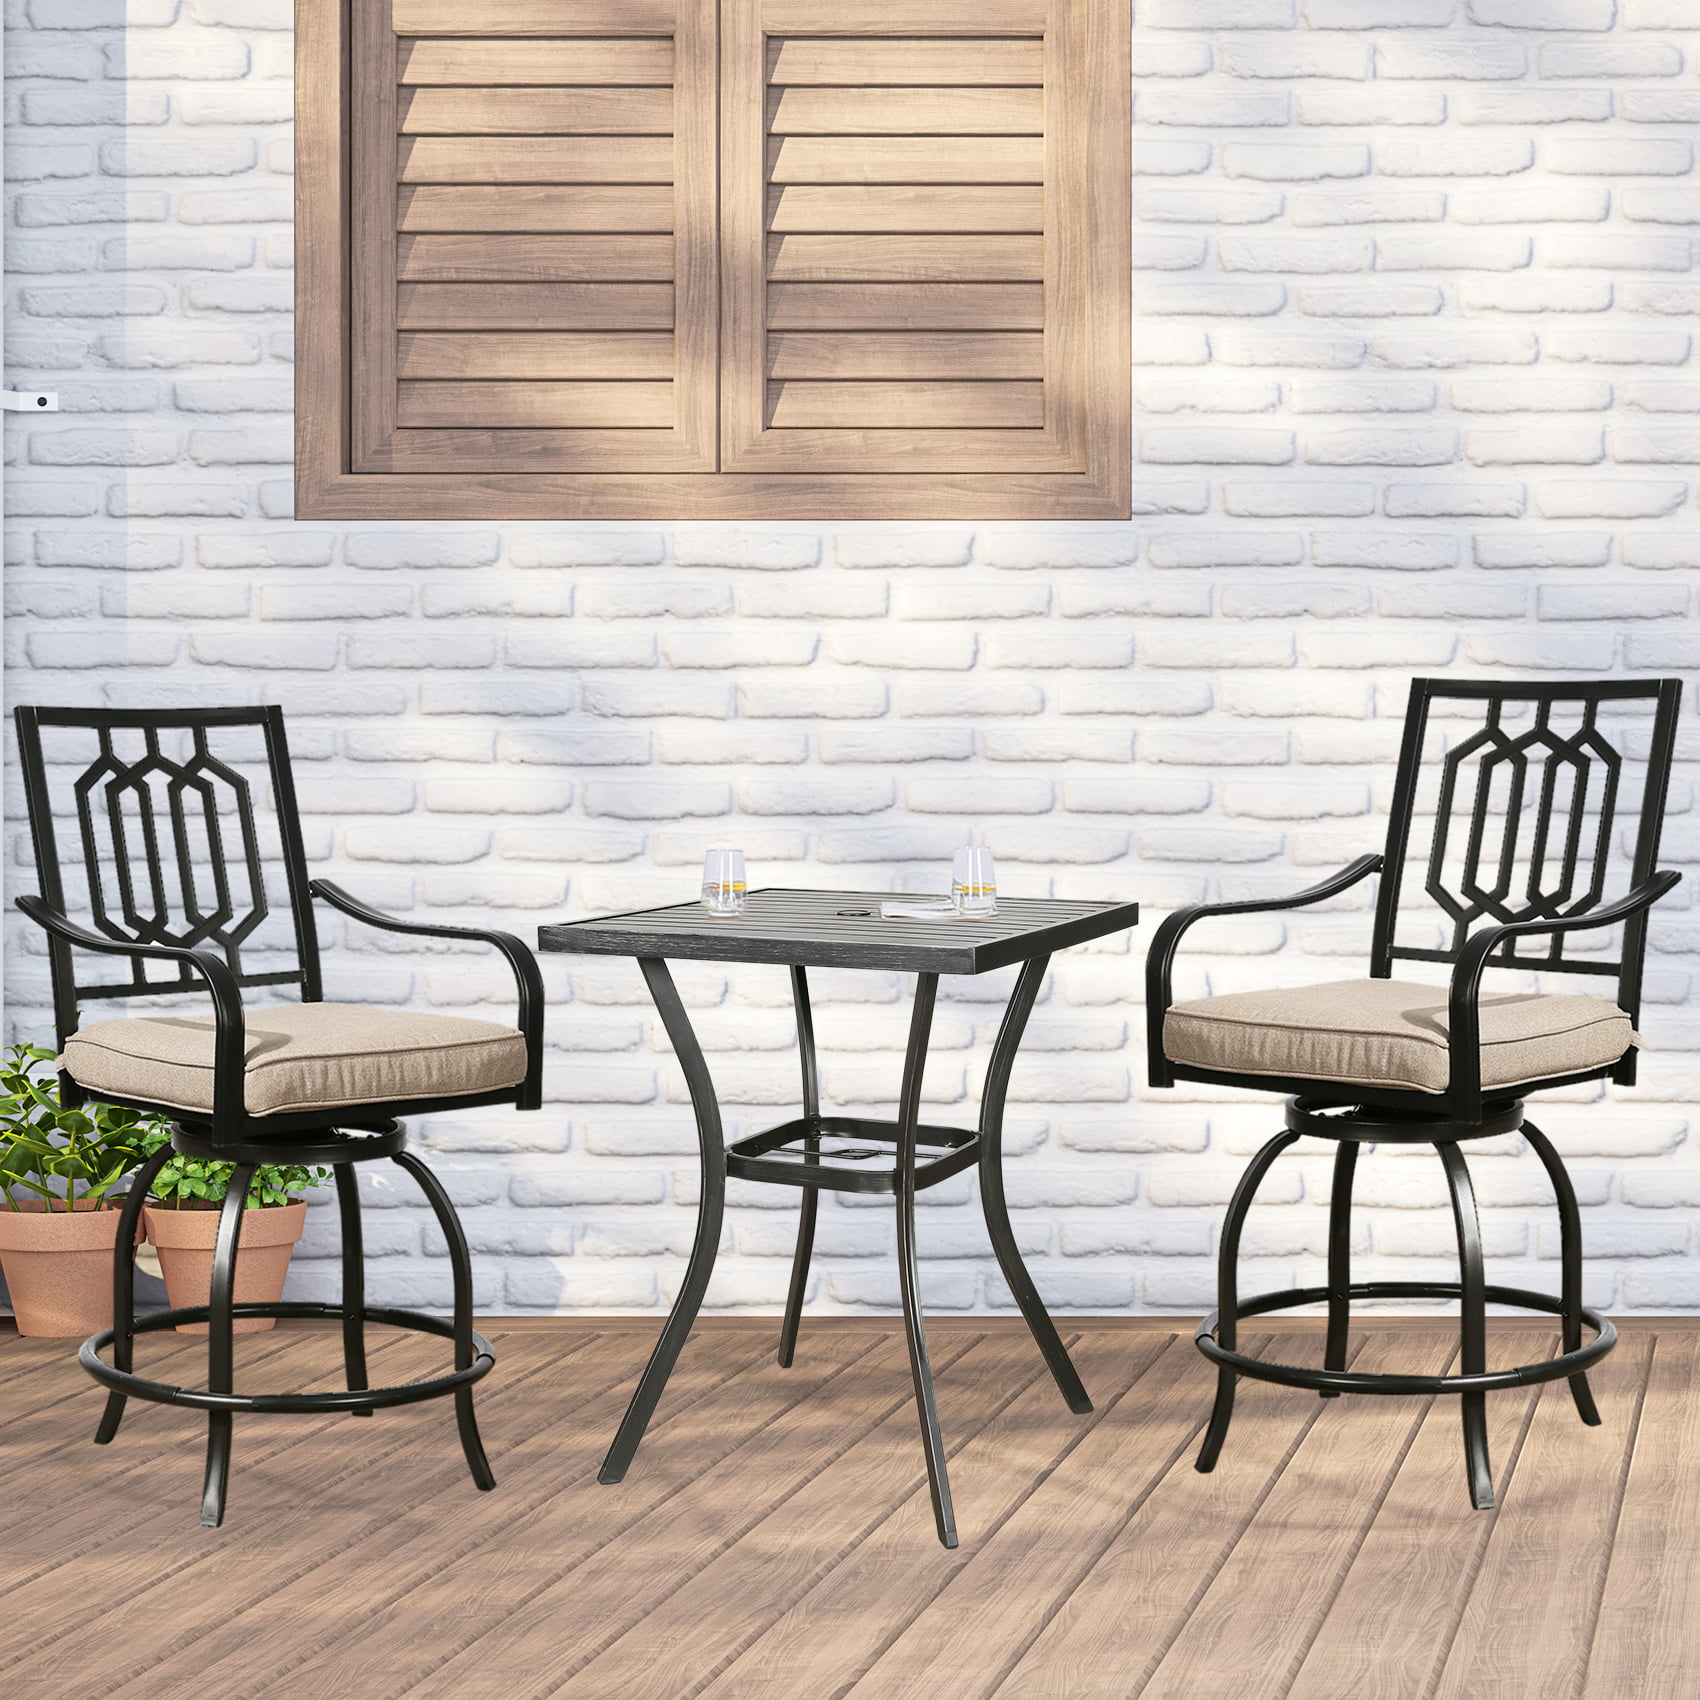 Ulax Furniture 3 Pieces Outdoor Bar Set Patio Furniture Conversation Bistro Set with Counter Height Swivel Chairs and Bar Table 